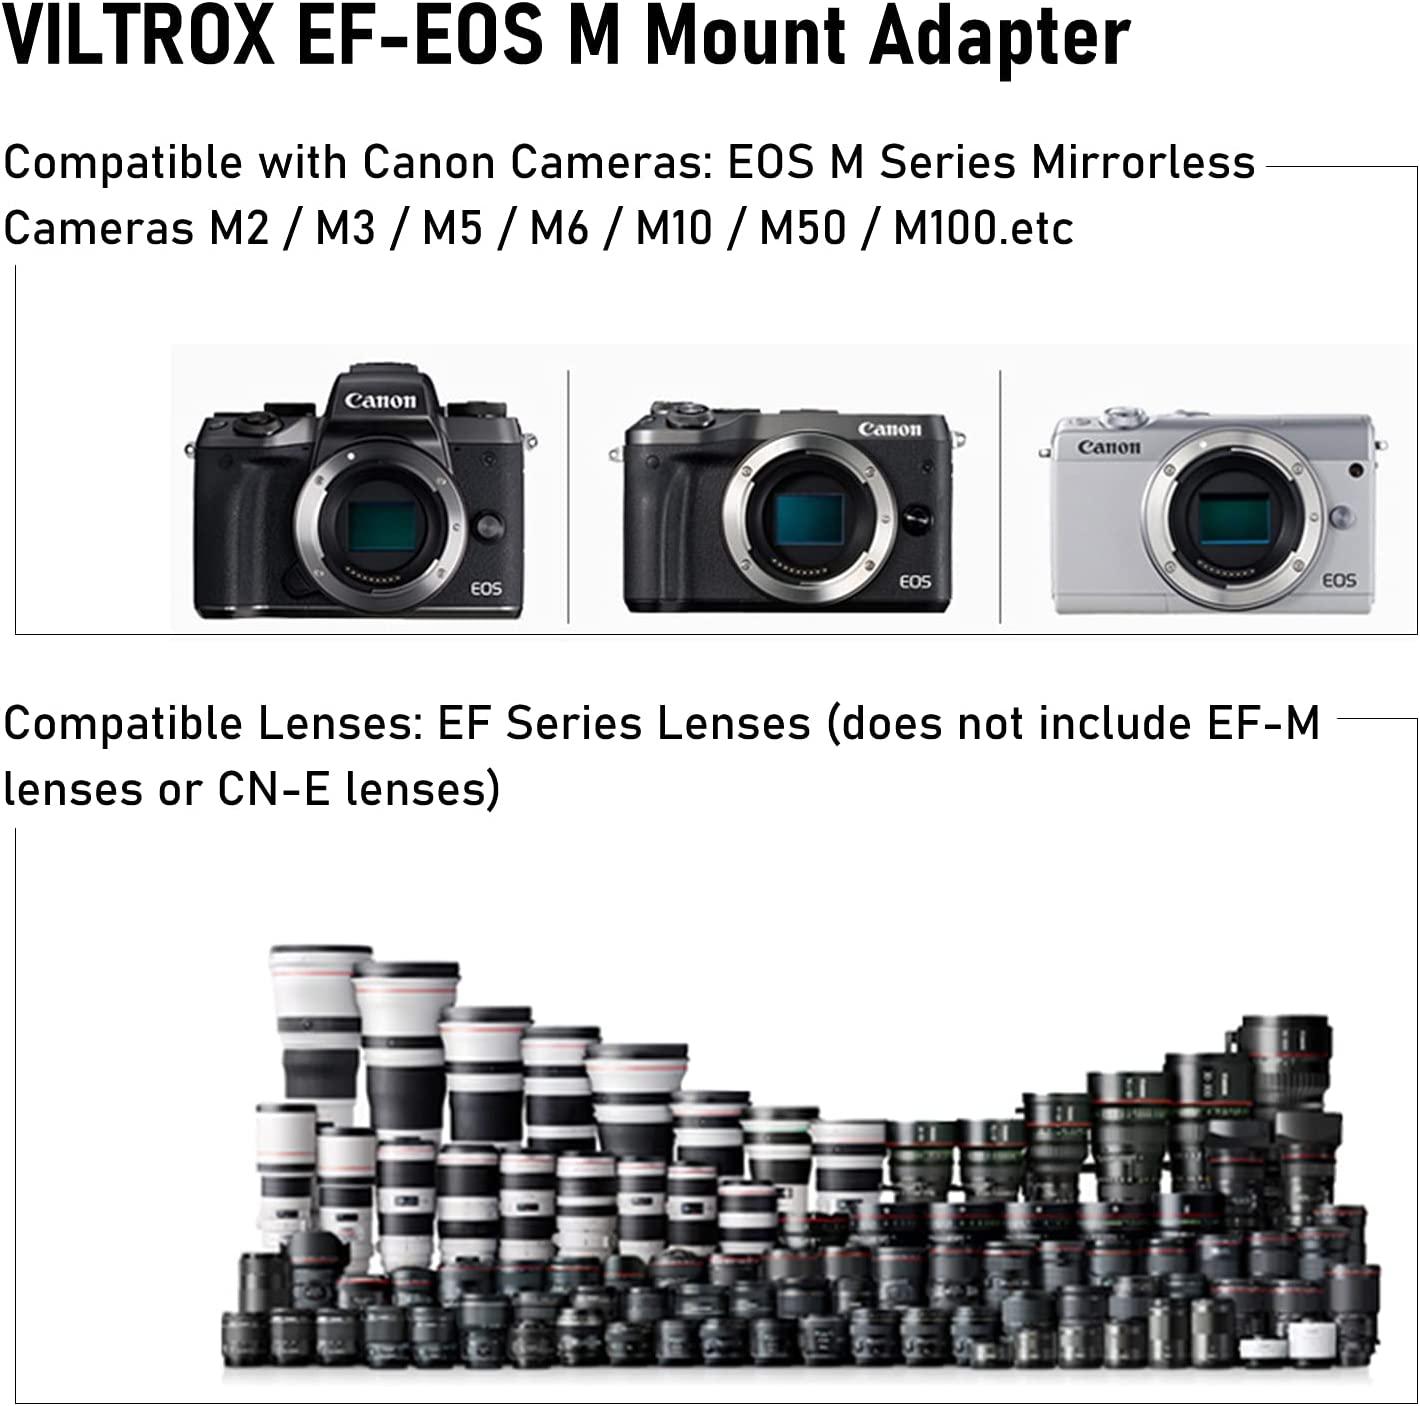 VILTROX EF-EOS M Lens Mount Auto Focus Compatible with Canon EF/EF-S Lens to Canon EOS M (EF-M Mount) Mirrorless Camera Body EOS M100 M50 M3 M10 M6 M5 to EOS